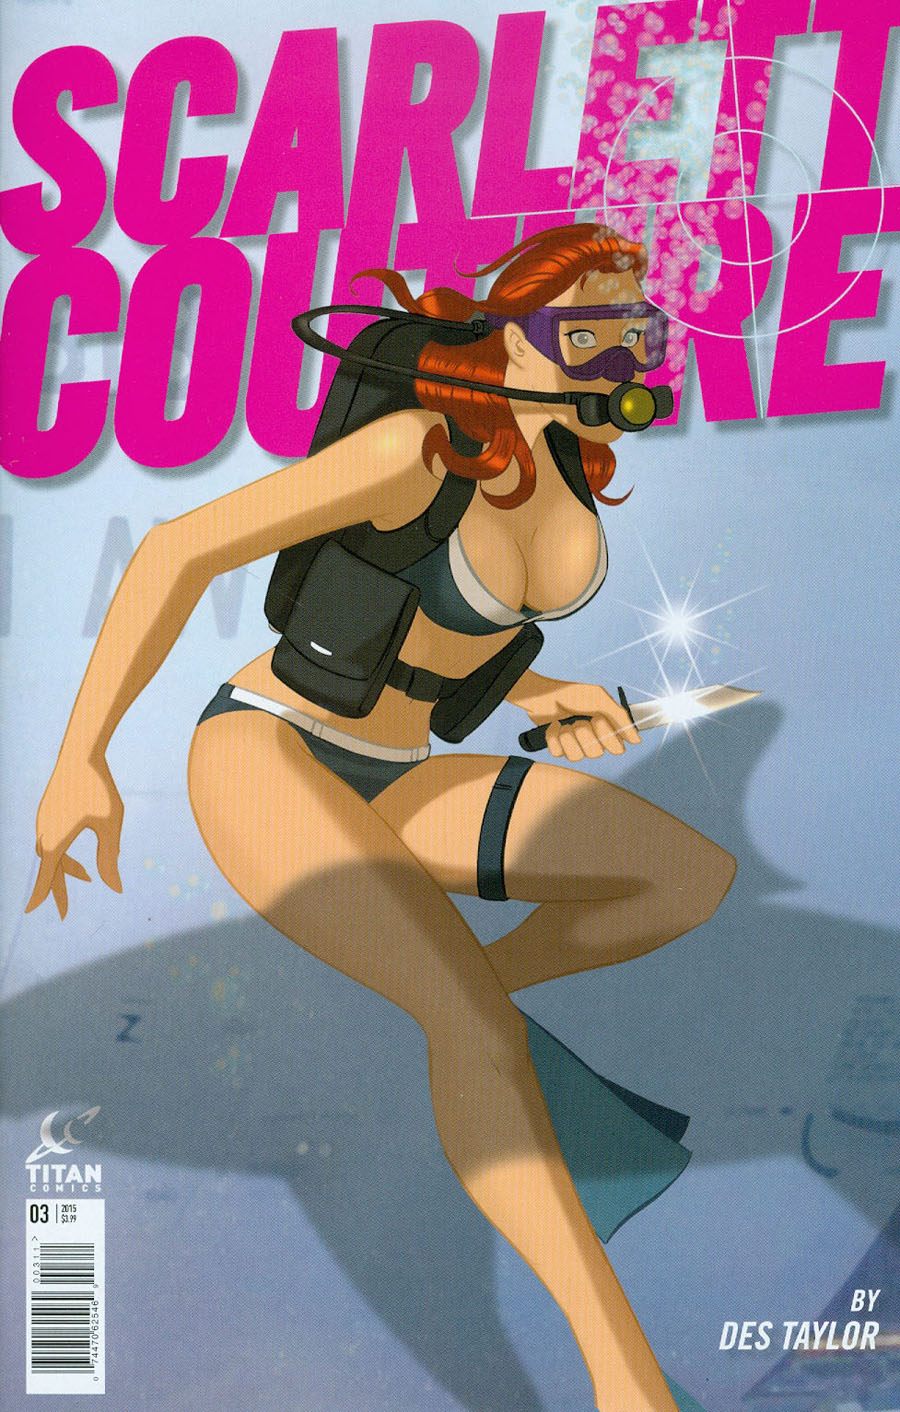 Scarlett Couture #3 Cover A Regular Des Taylor Cover